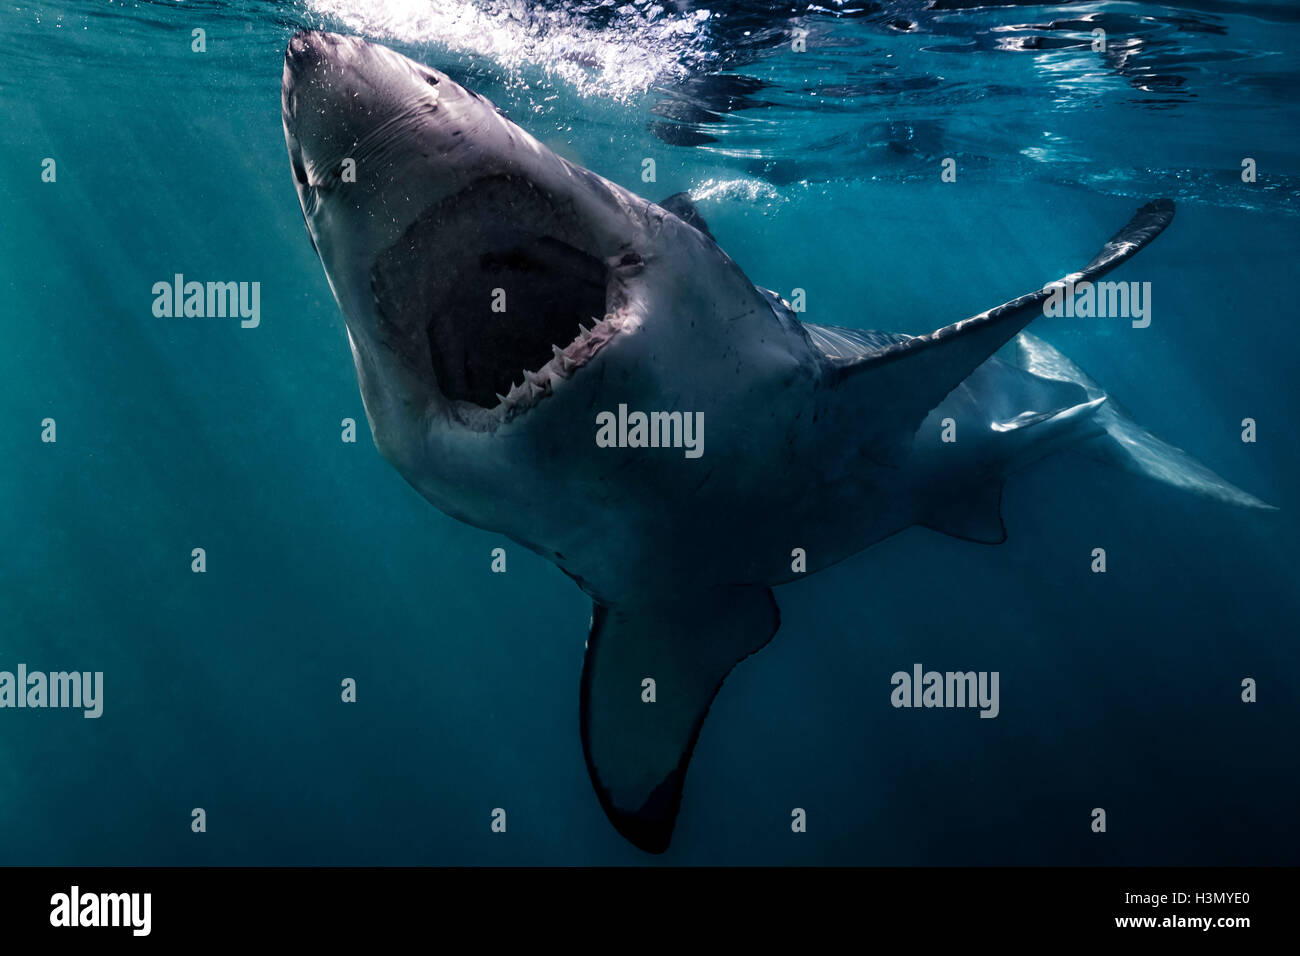 Great White Shark (Carcharodon Carcharias) swimming near surface of ocean, Gansbaai, South Africa Stock Photo